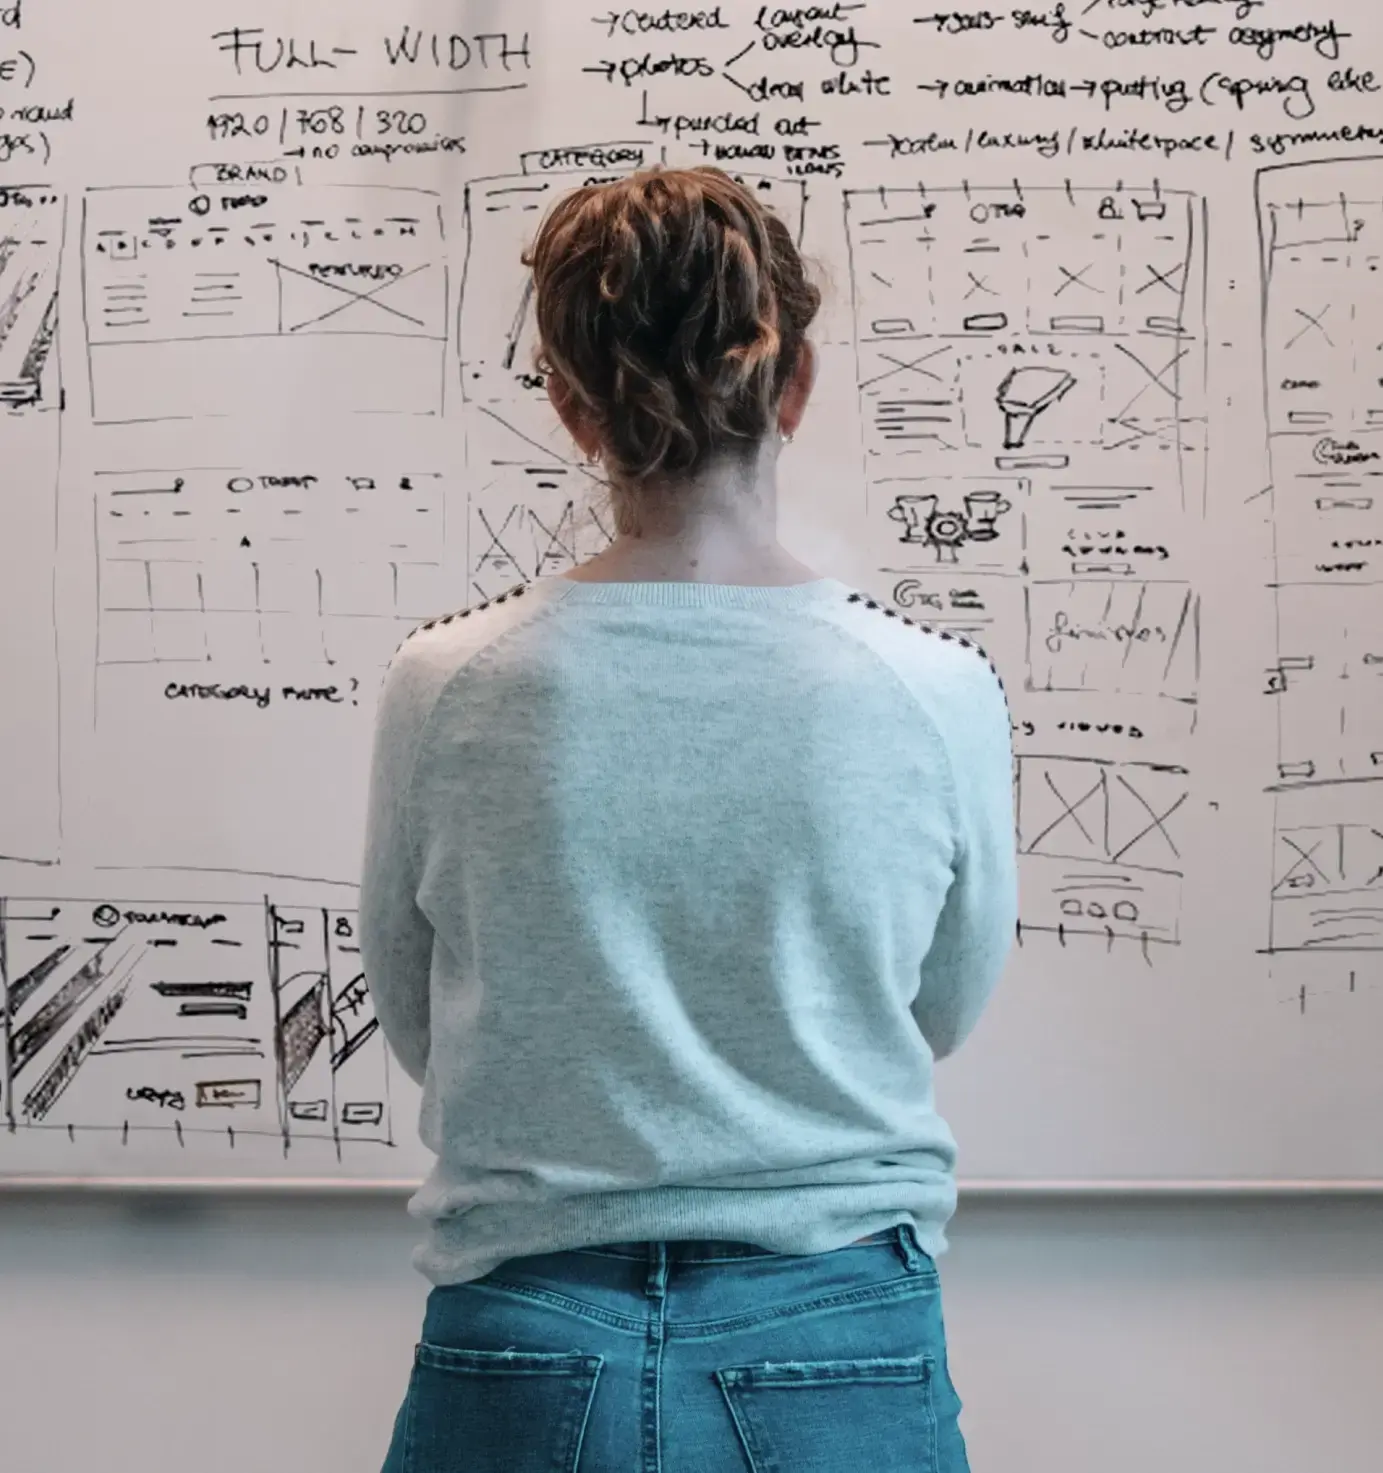 person stood looking at planning notes on a big whiteboard in front of them